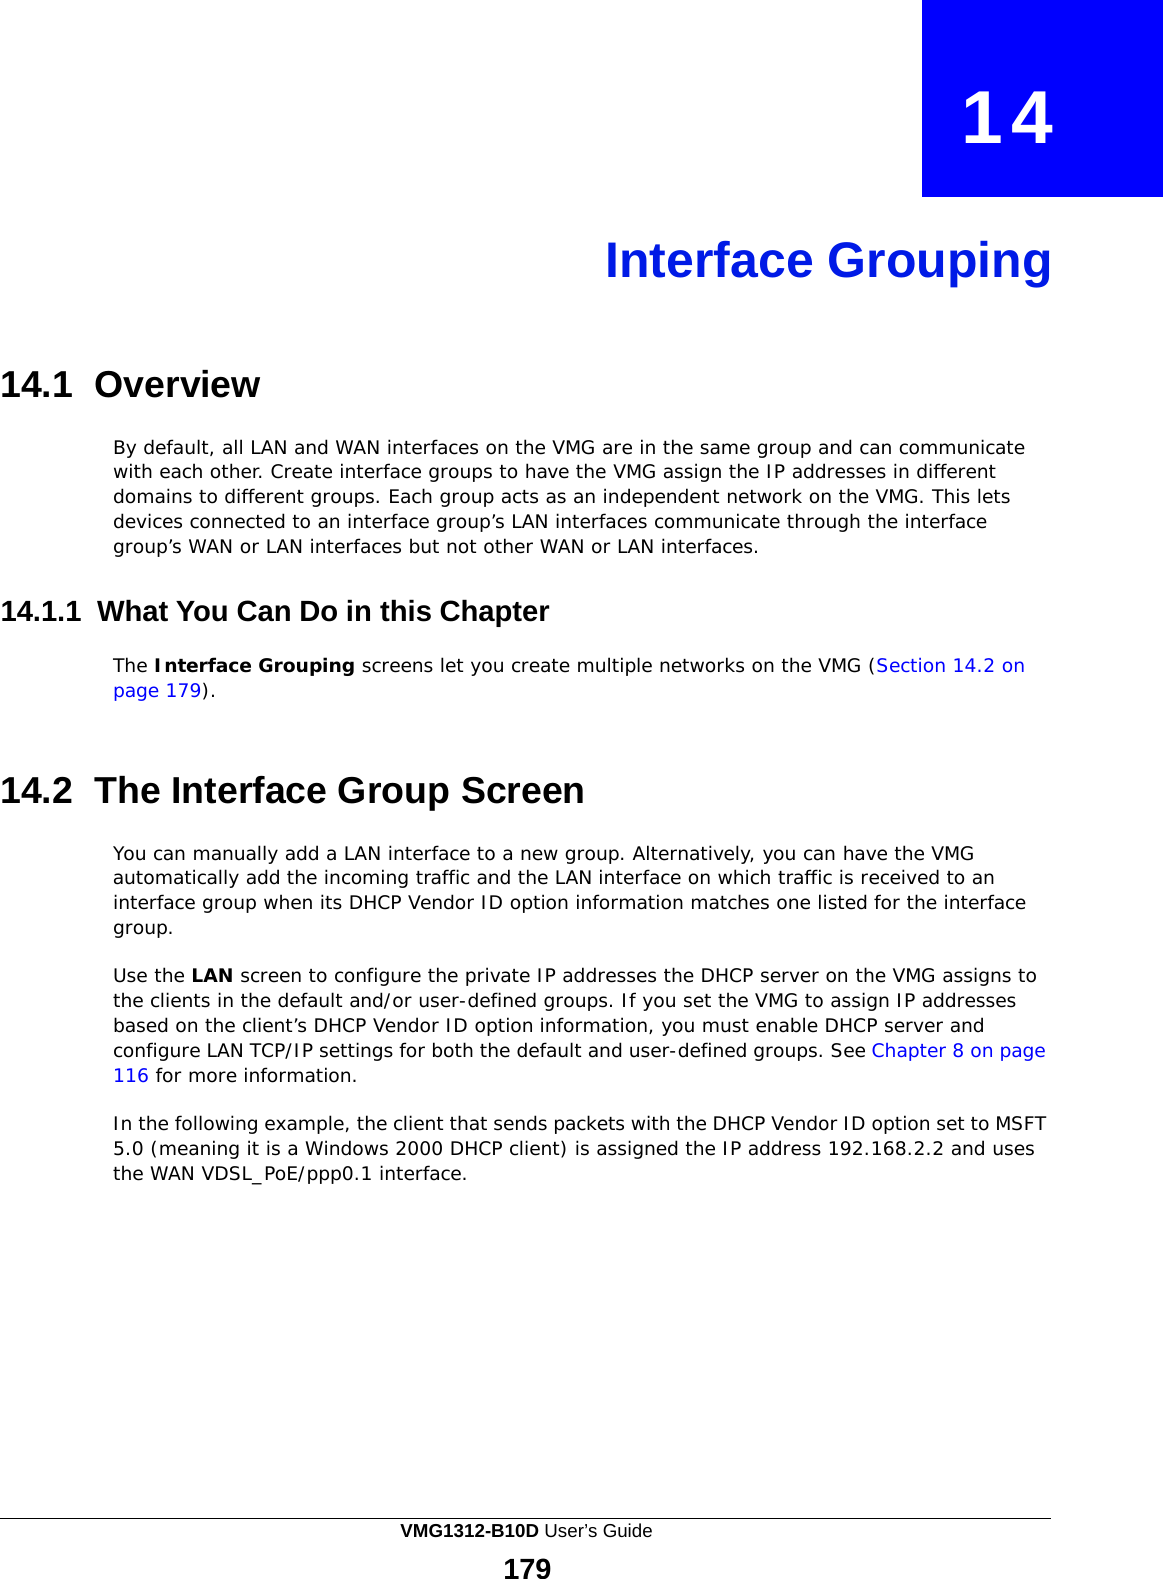  14     Interface Grouping     14.1 Overview  By default, all LAN and WAN interfaces on the VMG are in the same group and can communicate with each other. Create interface groups to have the VMG assign the IP addresses in different domains to different groups. Each group acts as an independent network on the VMG. This lets devices connected to an interface group’s LAN interfaces communicate through the interface group’s WAN or LAN interfaces but not other WAN or LAN interfaces.   14.1.1 What You Can Do in this Chapter  The Interface Grouping screens let you create multiple networks on the VMG (Section 14.2 on page 179).    14.2 The Interface Group Screen  You can manually add a LAN interface to a new group. Alternatively, you can have the VMG automatically add the incoming traffic and the LAN interface on which traffic is received to an interface group when its DHCP Vendor ID option information matches one listed for the interface group.  Use the LAN screen to configure the private IP addresses the DHCP server on the VMG assigns to the clients in the default and/or user-defined groups. If you set the VMG to assign IP addresses based on the client’s DHCP Vendor ID option information, you must enable DHCP server and configure LAN TCP/IP settings for both the default and user-defined groups. See Chapter 8 on page 116 for more information.  In the following example, the client that sends packets with the DHCP Vendor ID option set to MSFT 5.0 (meaning it is a Windows 2000 DHCP client) is assigned the IP address 192.168.2.2 and uses the WAN VDSL_PoE/ppp0.1 interface. VMG1312-B10D User’s Guide 179  